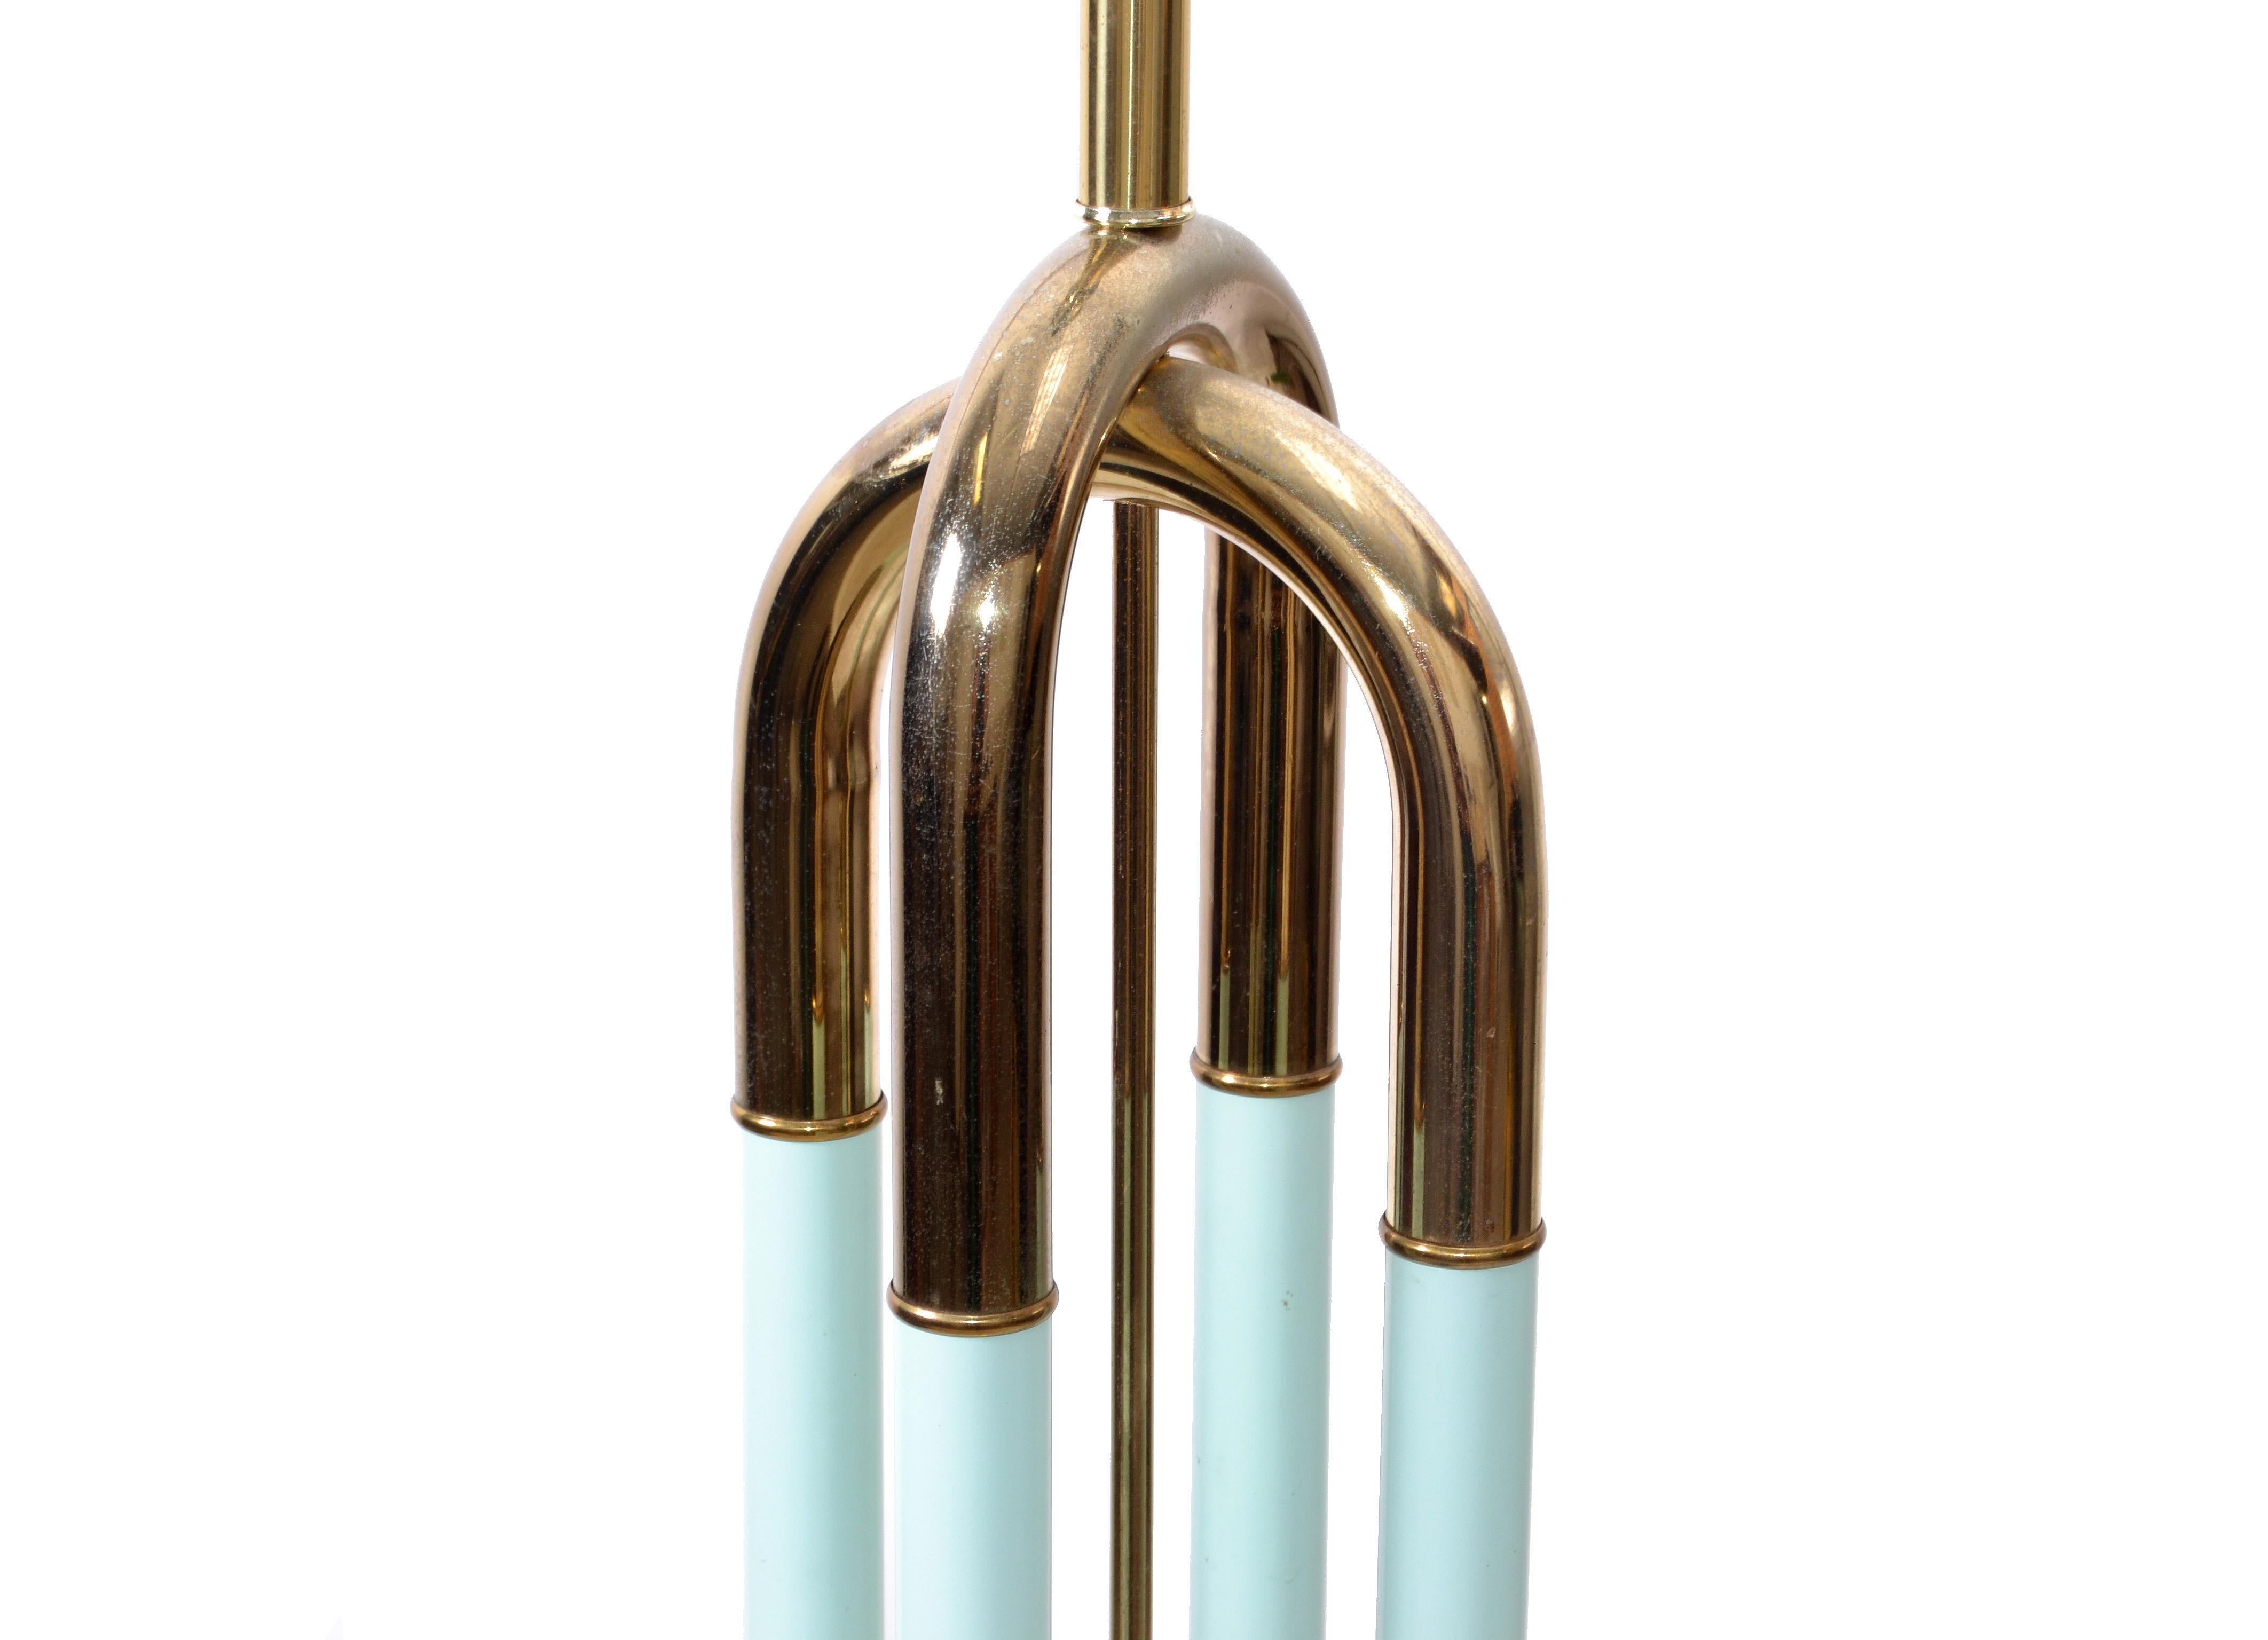 American Mid-Century Modern Brass-Plated and Turquoise Enamel Finish Floor Lamp For Sale